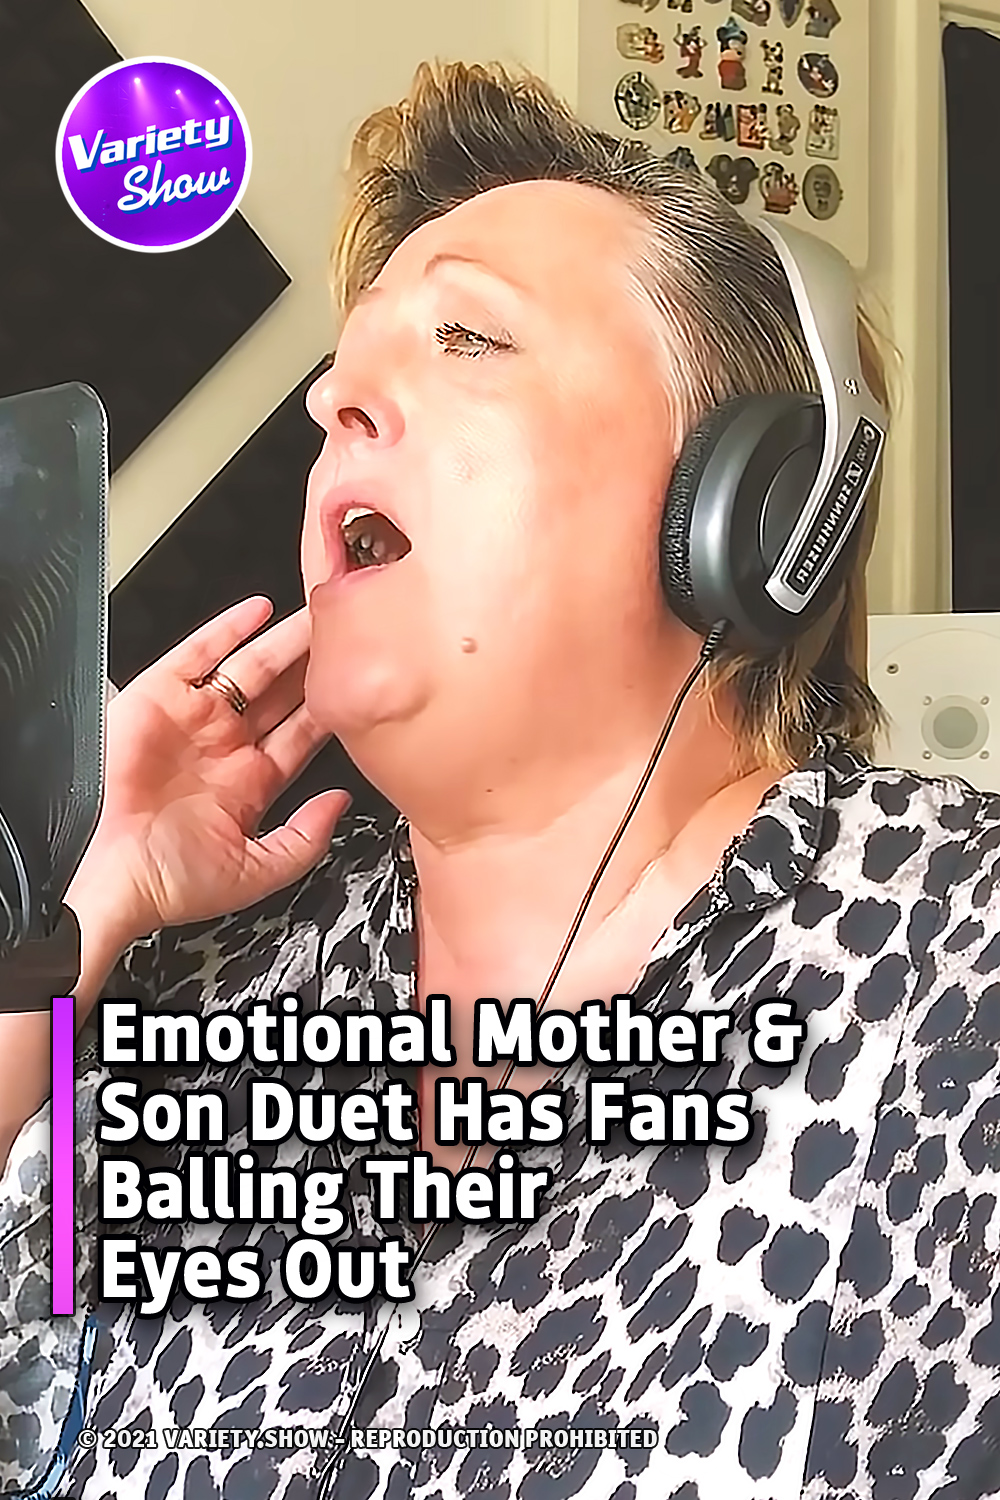 Emotional Mother & Son Duet Has Fans Balling Their Eyes Out